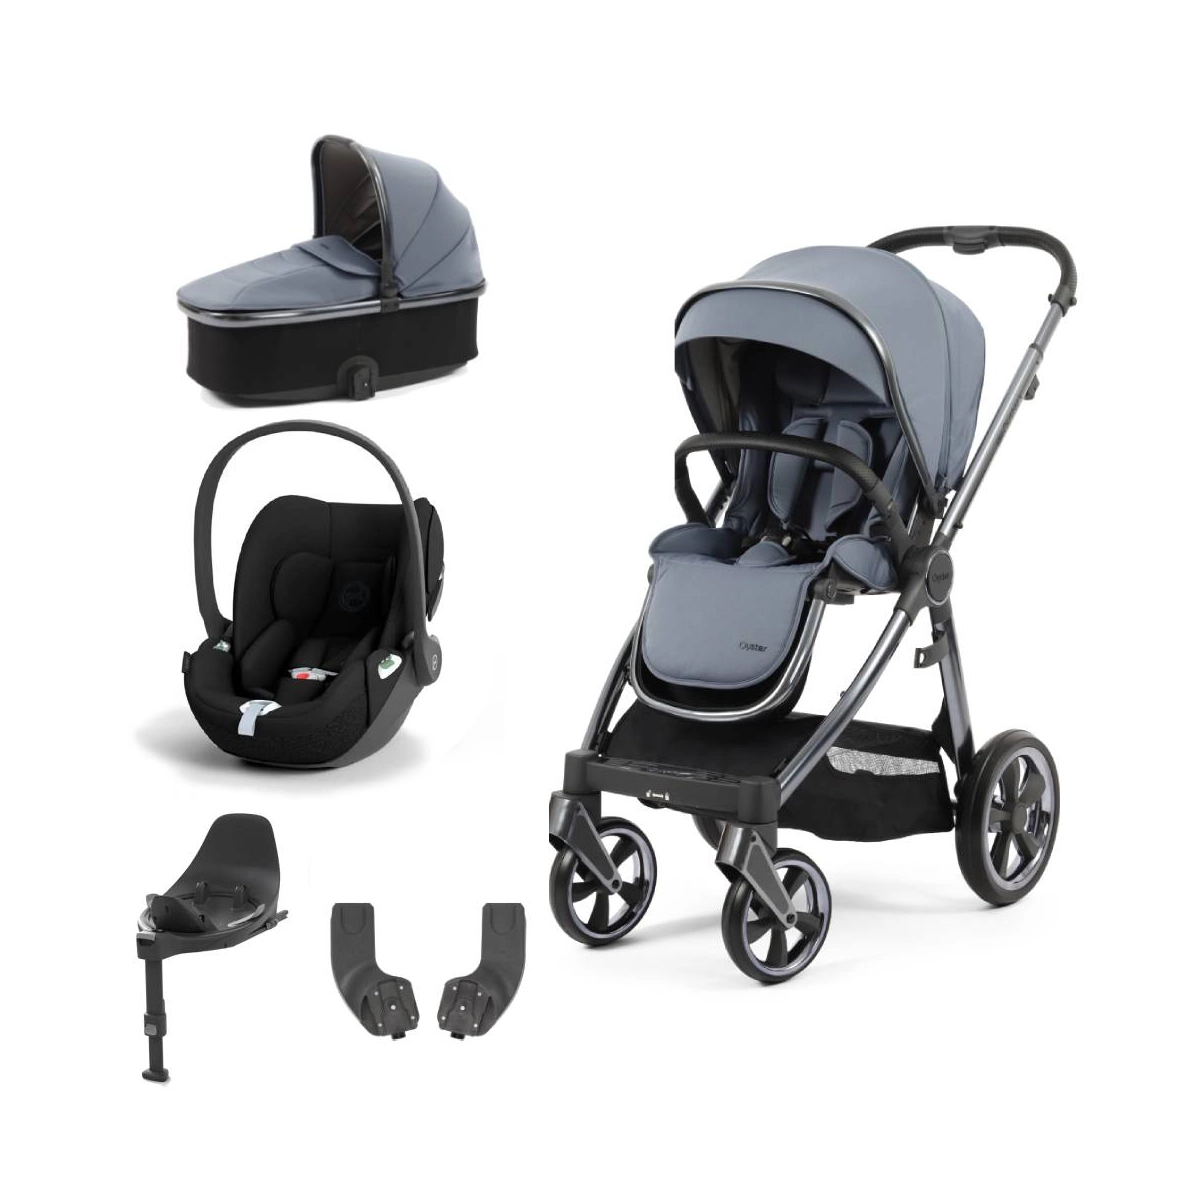 BabyStyle Oyster 3 Gun Metal Chassis Essential 5 Piece Bundle with Cybex Cloud T Car Seat & Base